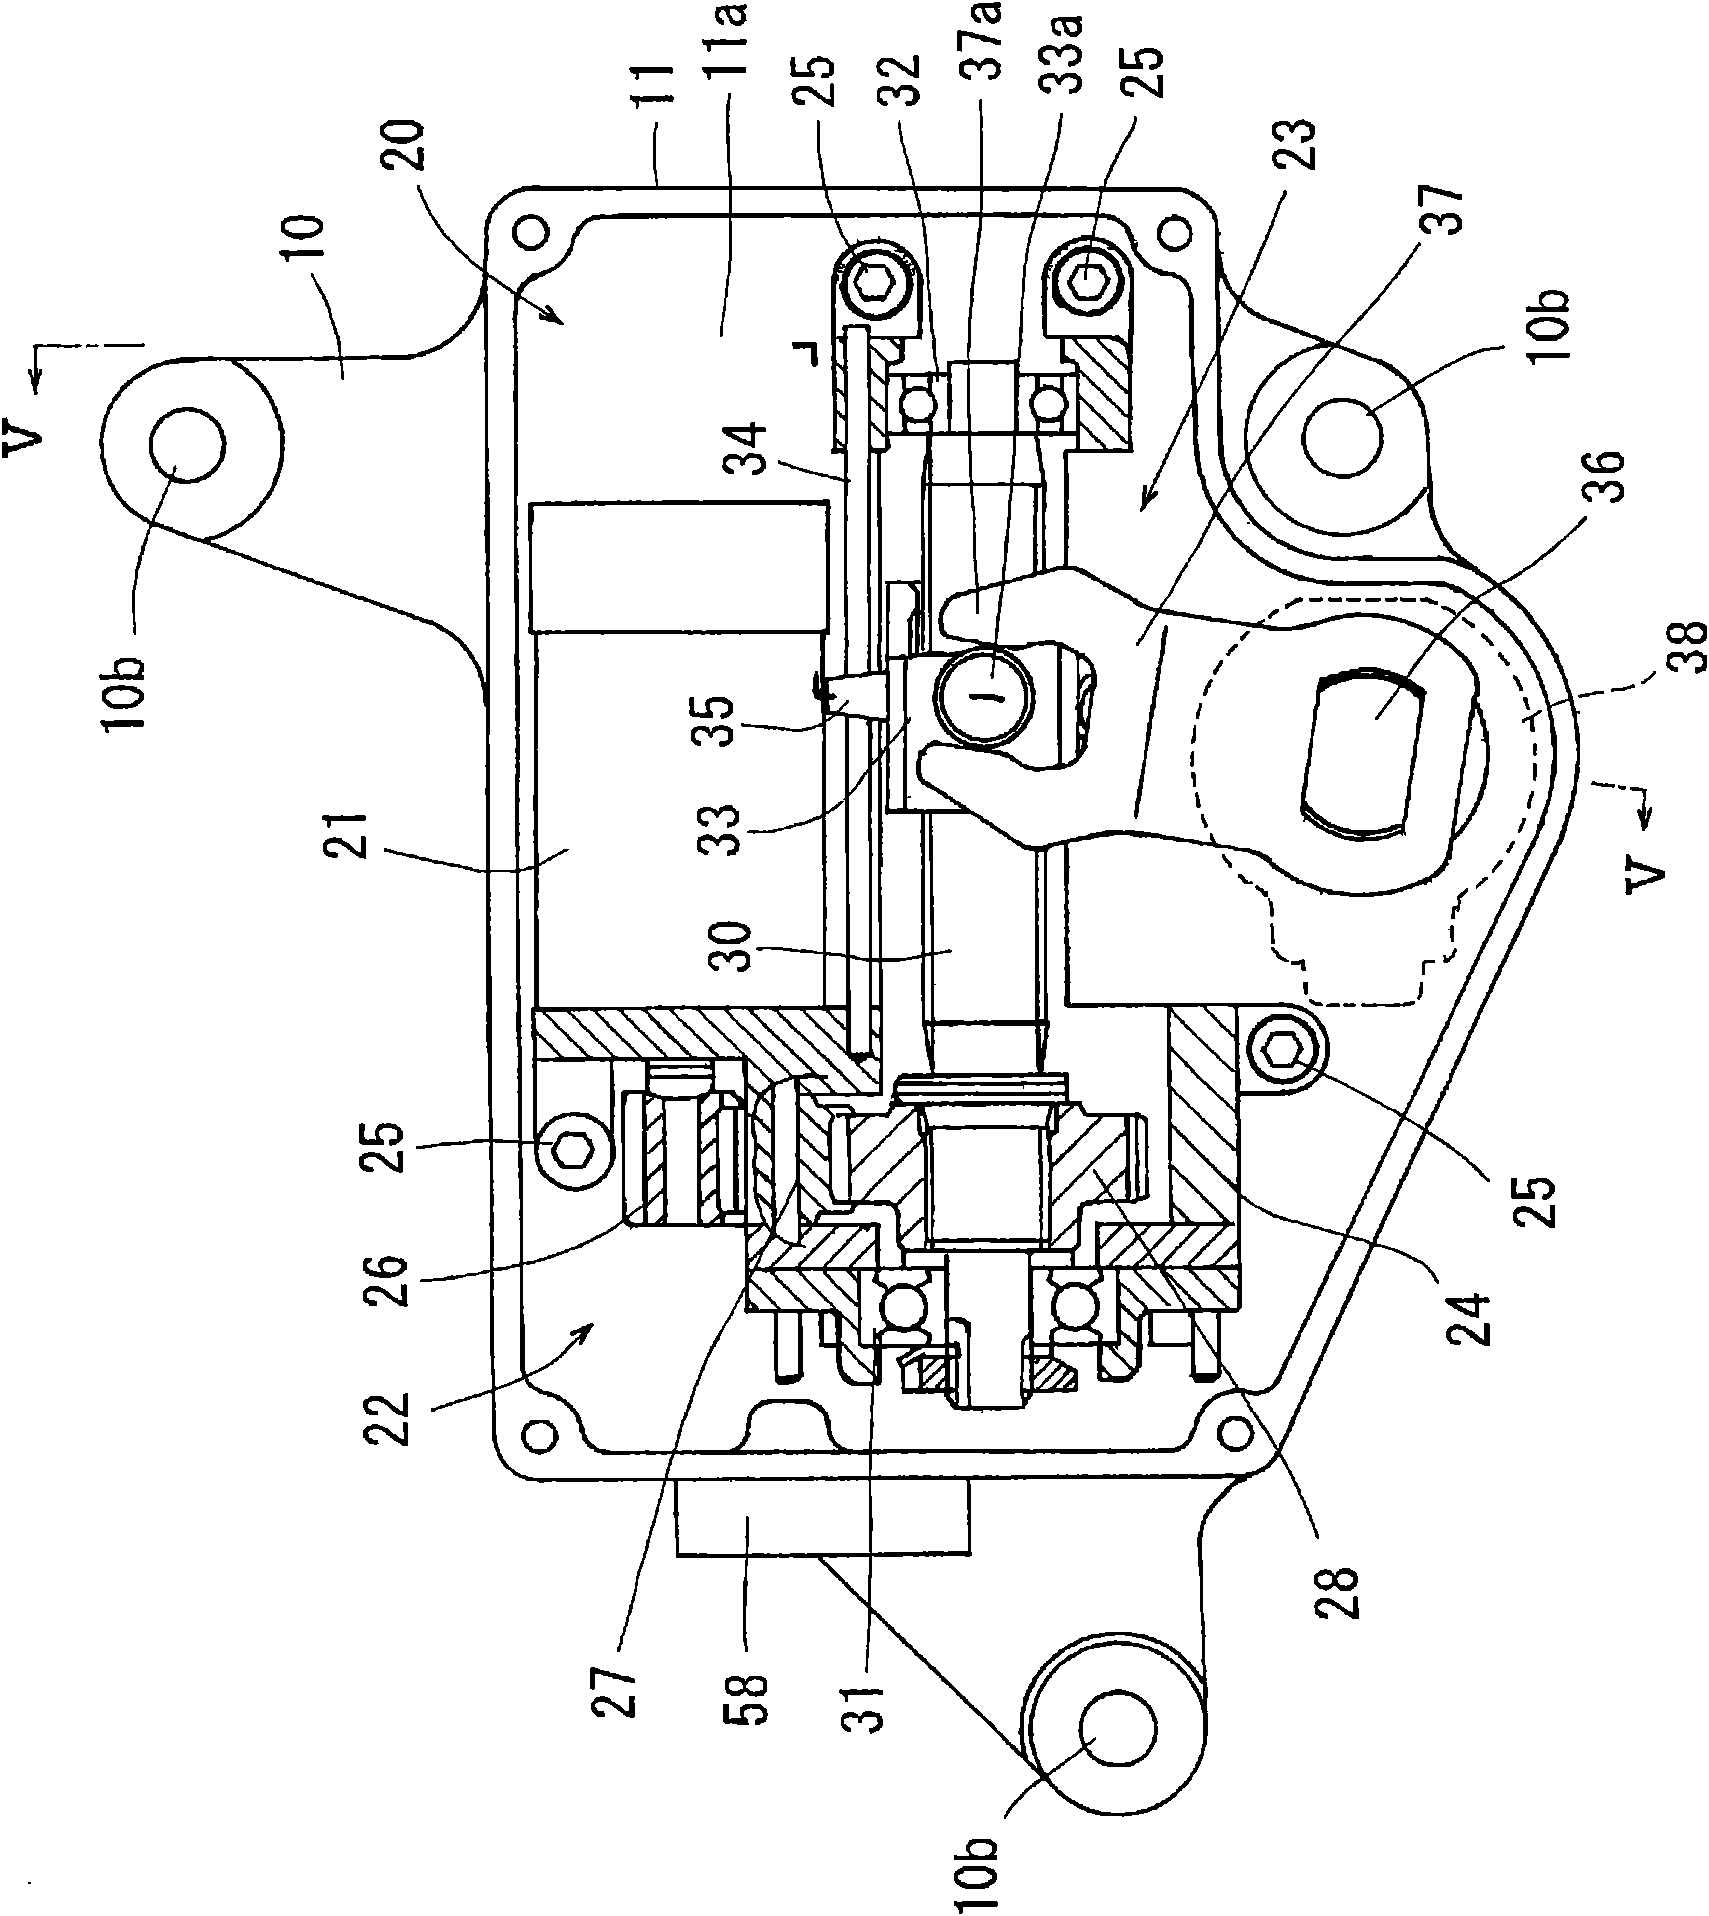 Control unit for automatic transmission